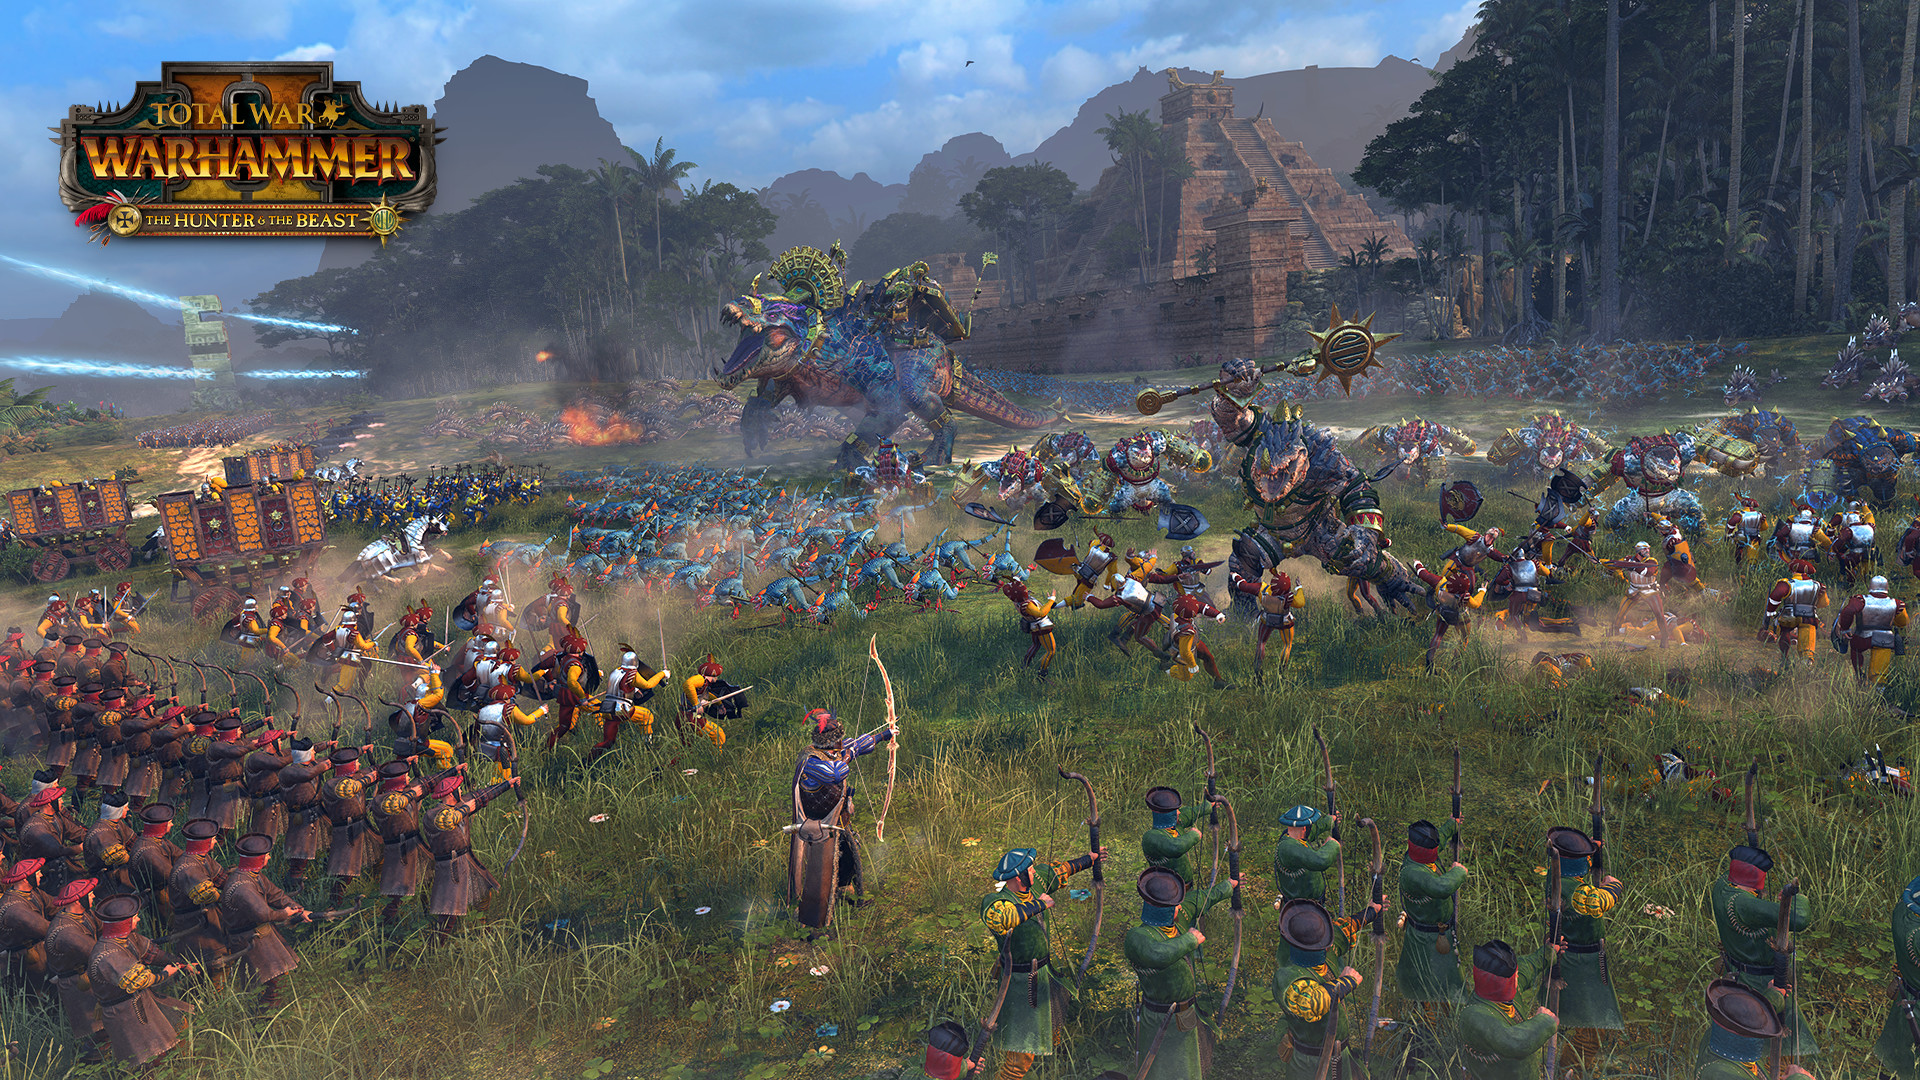 For Total War: Warhammer 3 patch 2.3 dedicated to Immortal Empires was released